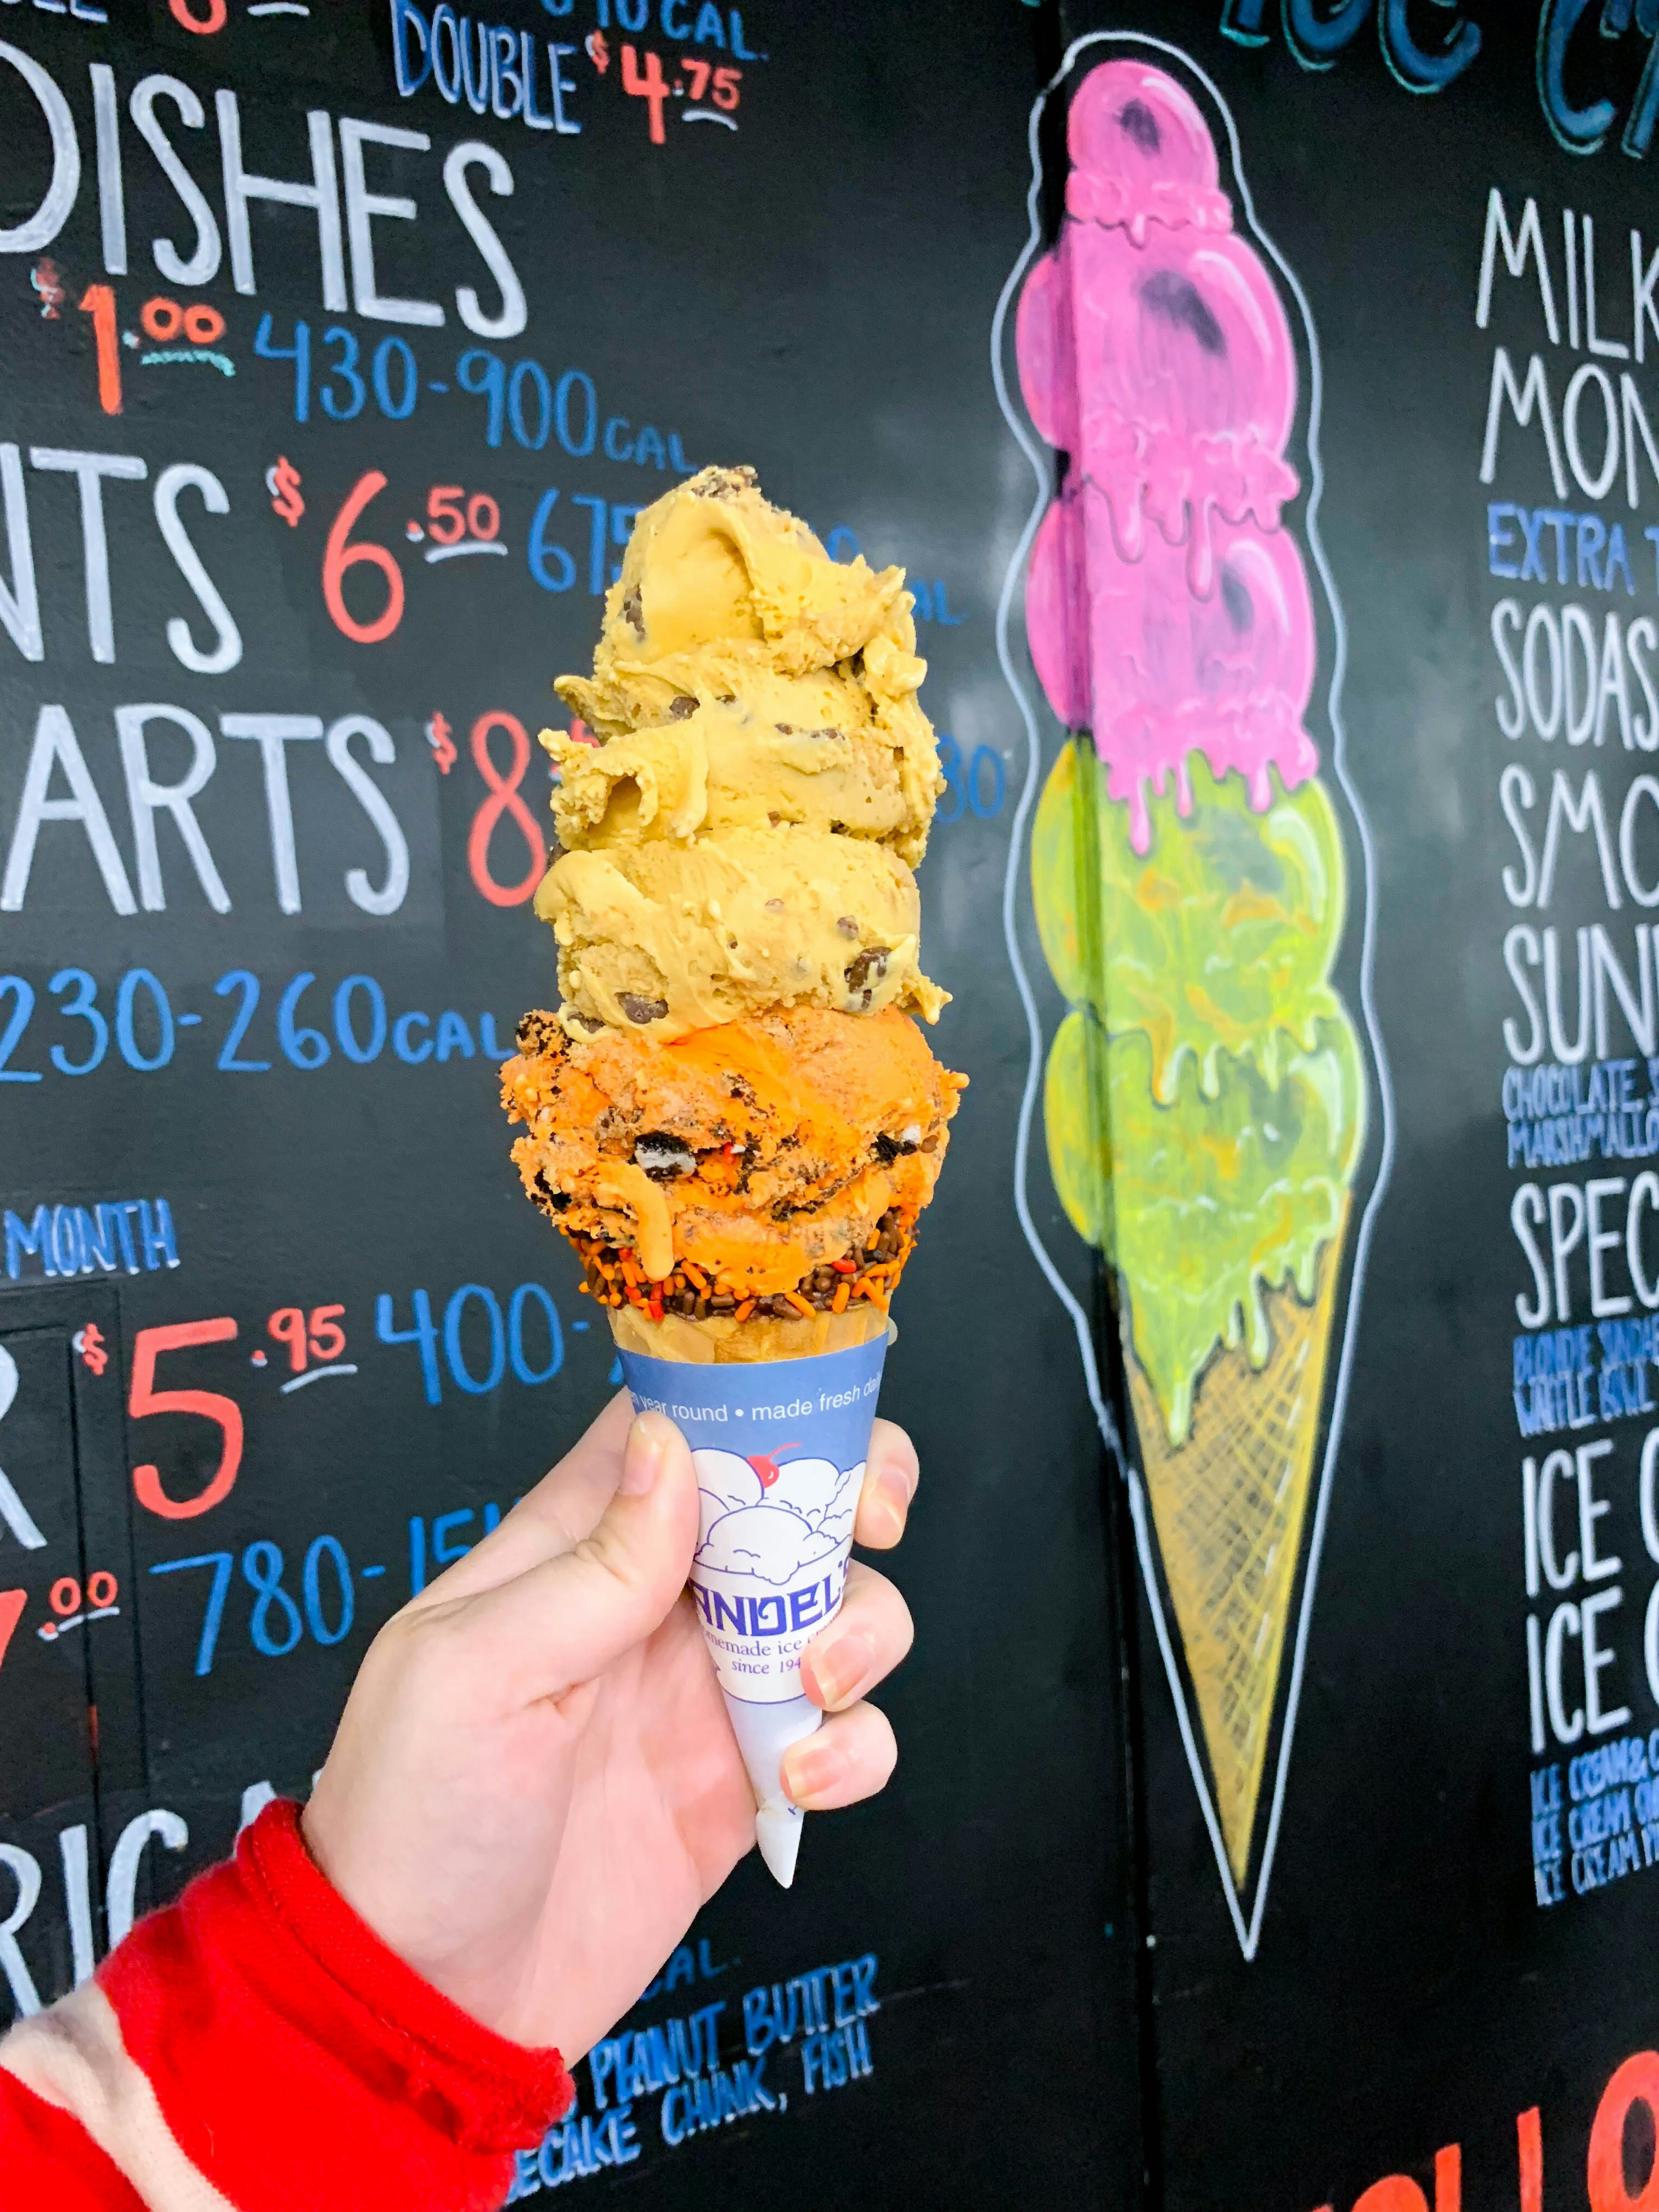 Four scoops of ice cream are stacked on a cone being held by a hand in front of a chalkboard offering other scoops; California ice cream